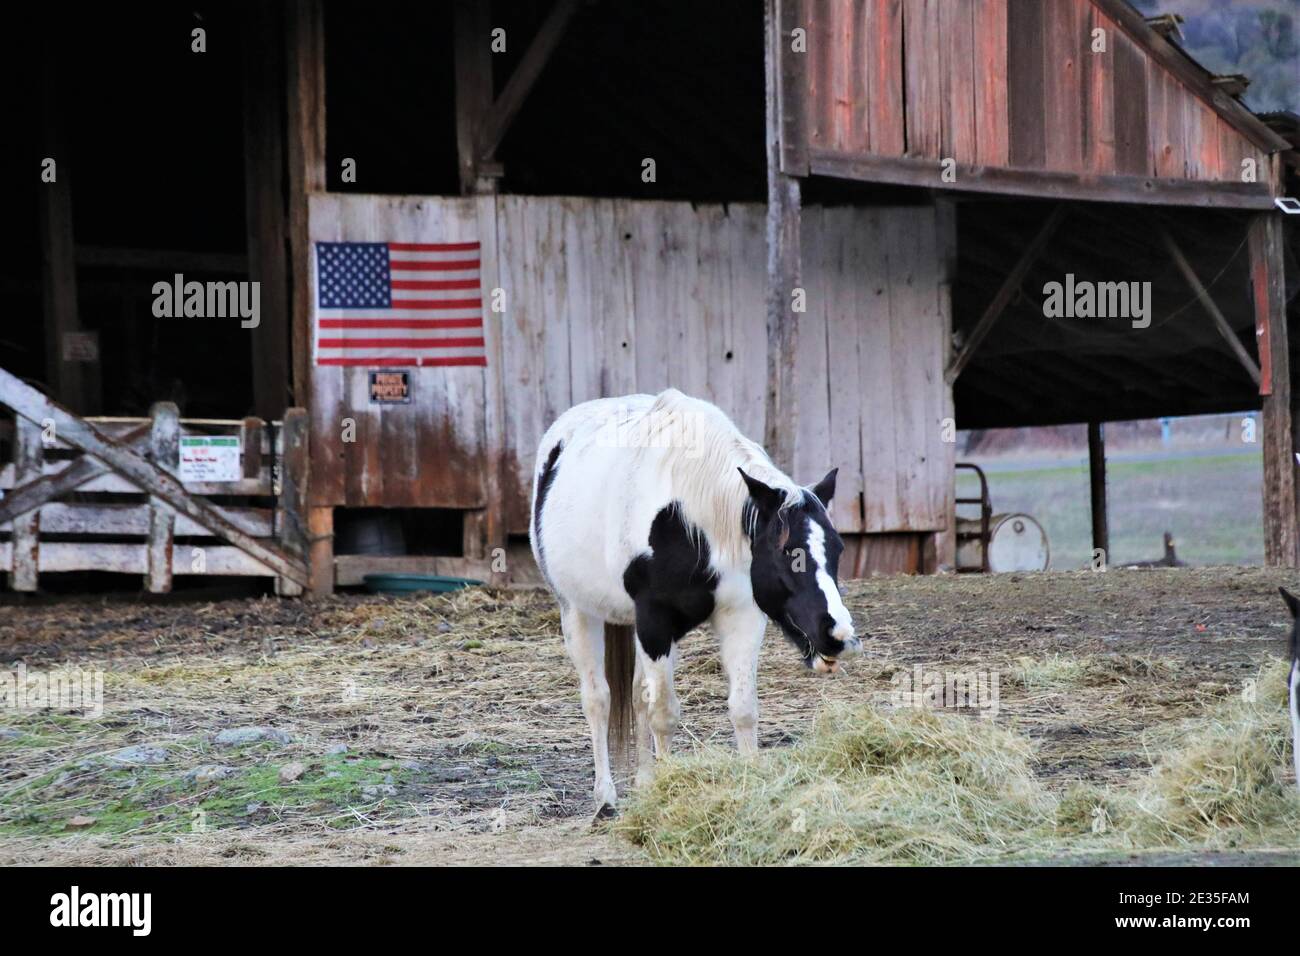 Horses eating in the evening near Lakeport on Clearlake, California with American flag on the old barn in the rear Stock Photo